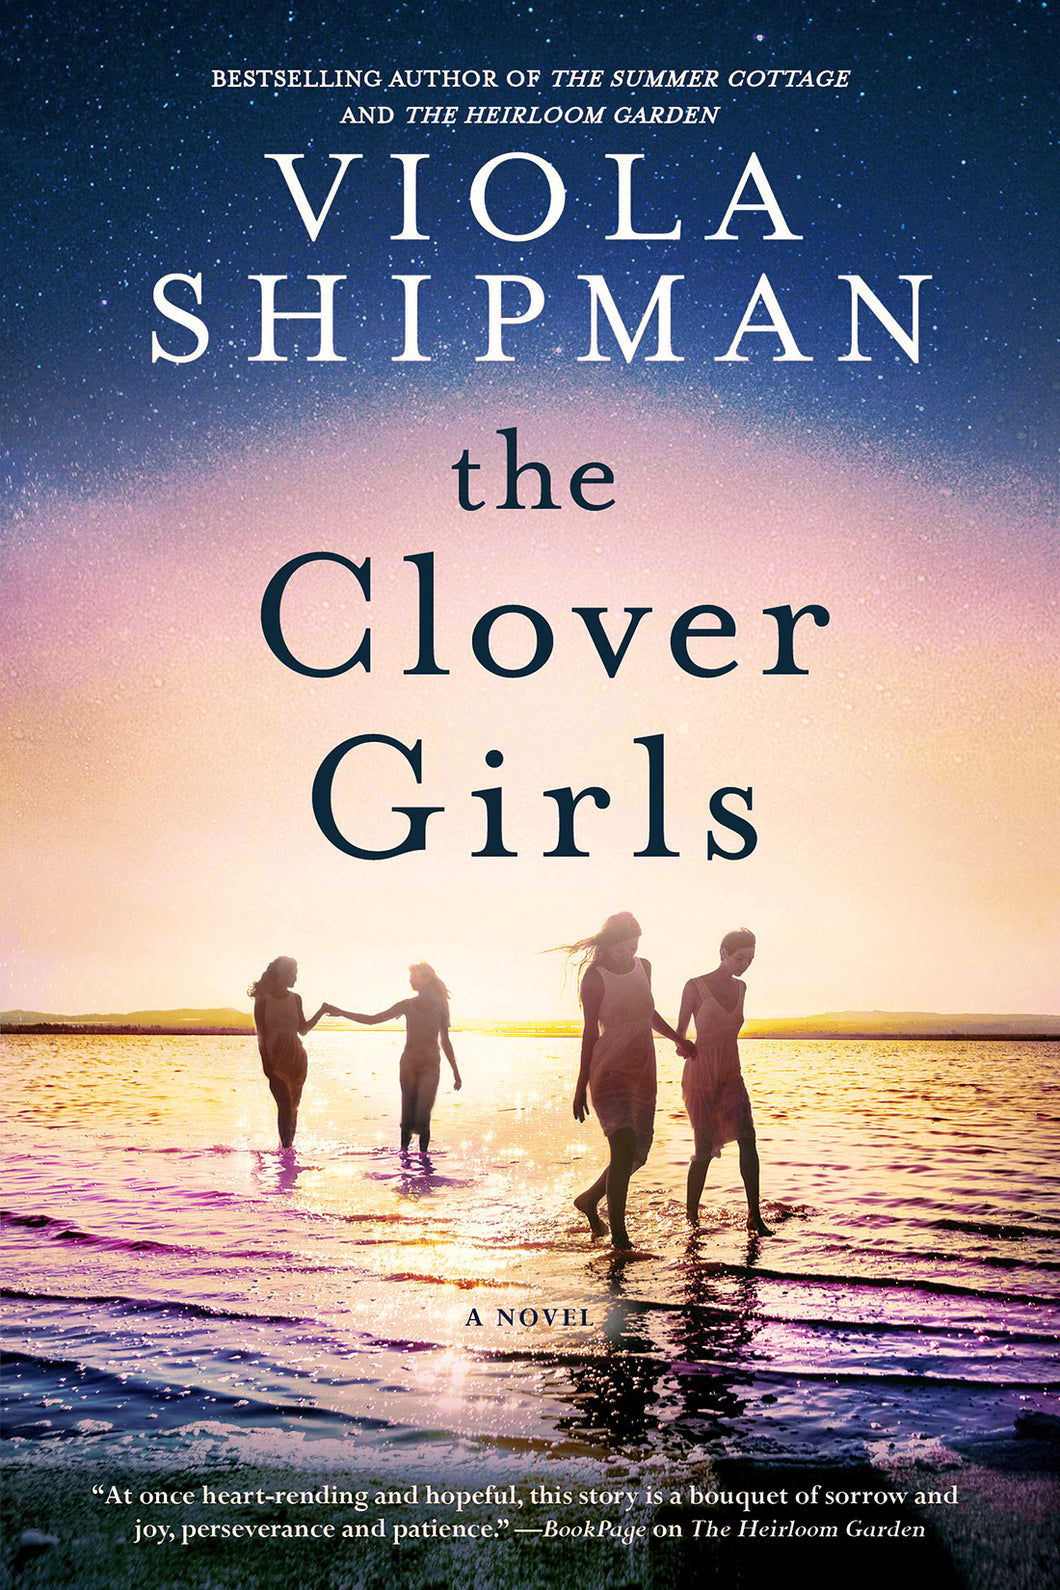 The Clover Girls by Viola Shipman / Hardcover or Paperback - NEW BOOK OR BOOK BOX